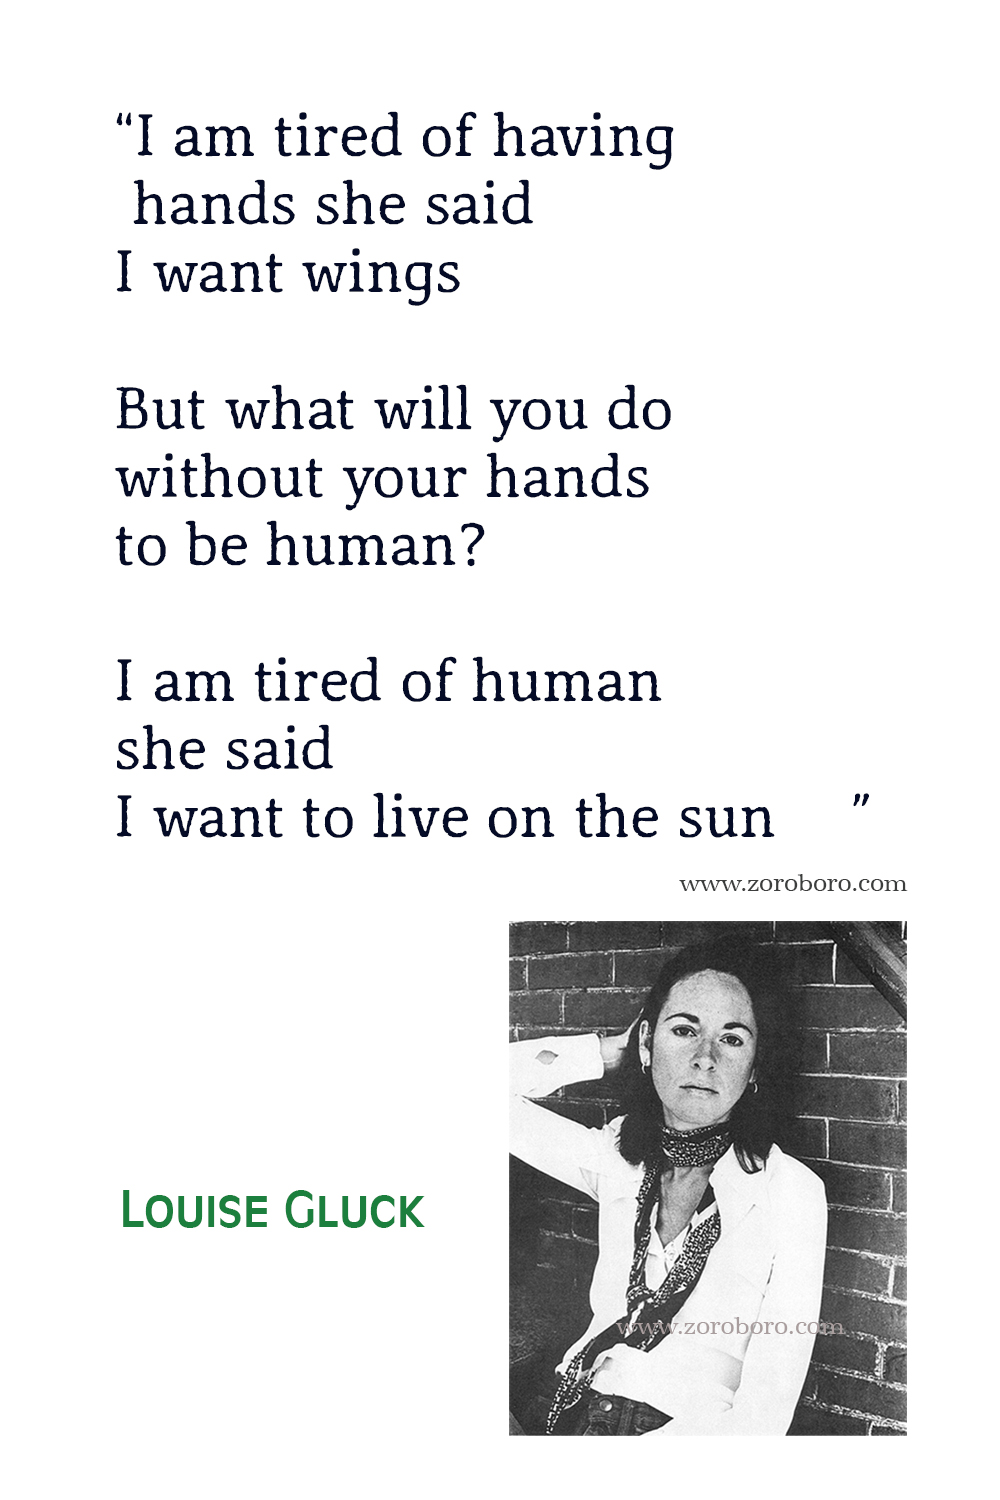 Louise Glück Quotes, Louise Gluck Poems, Louise Gluck Poetry, Louise Gluck Books Quotes, Louise Gluck Averno Quotes. Louise Glück Poems Online.